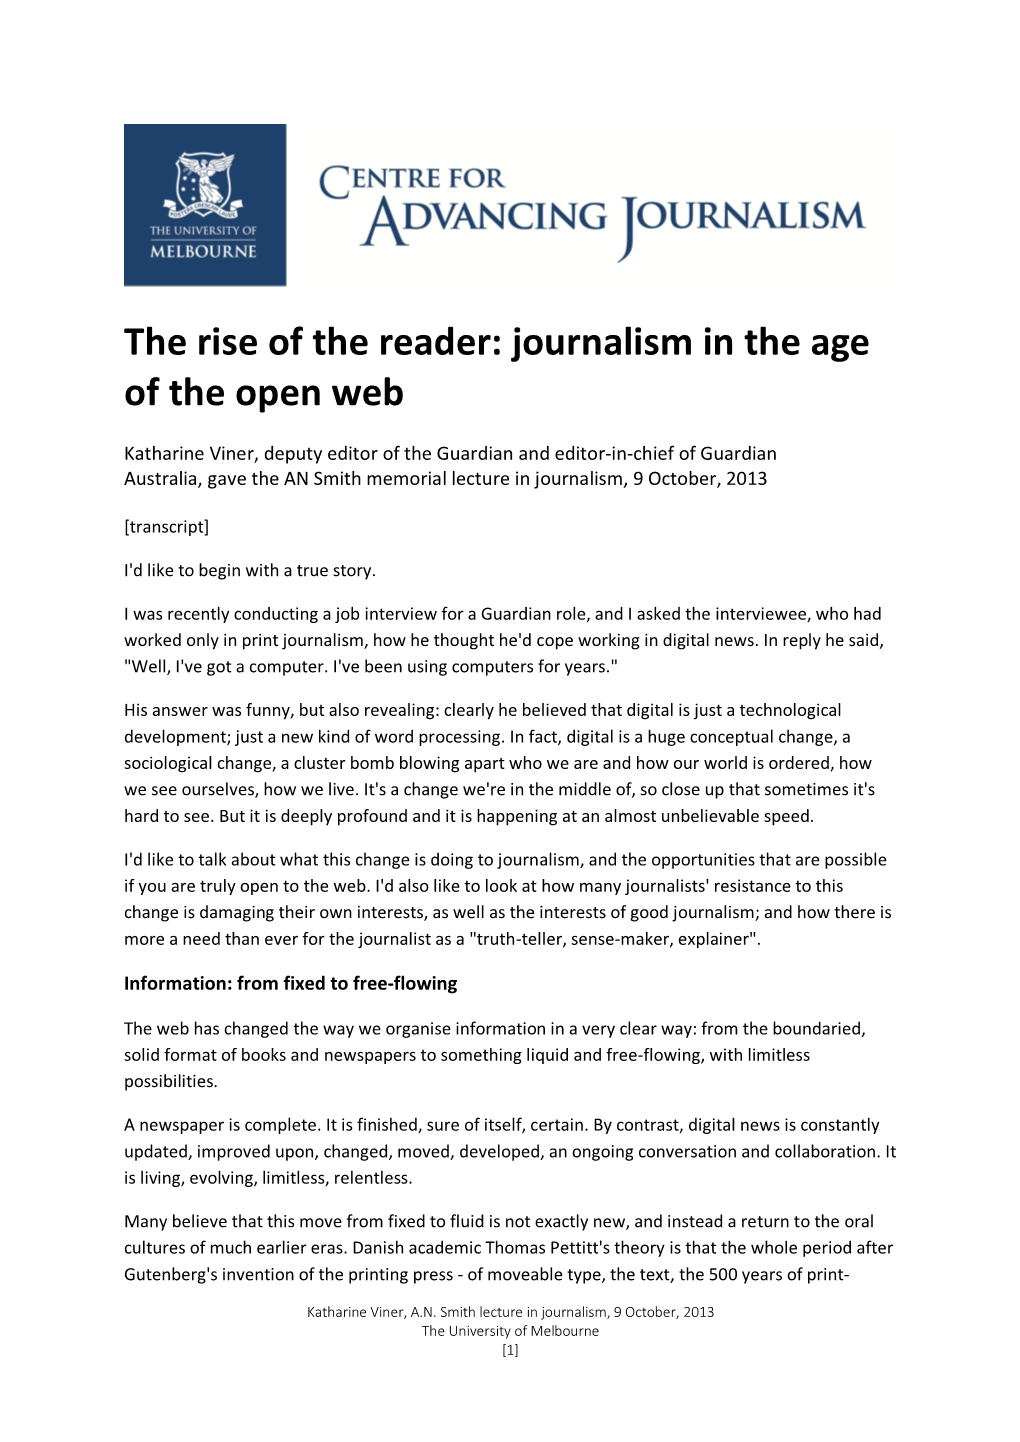 The Rise of the Reader: Journalism in the Age of the Open Web